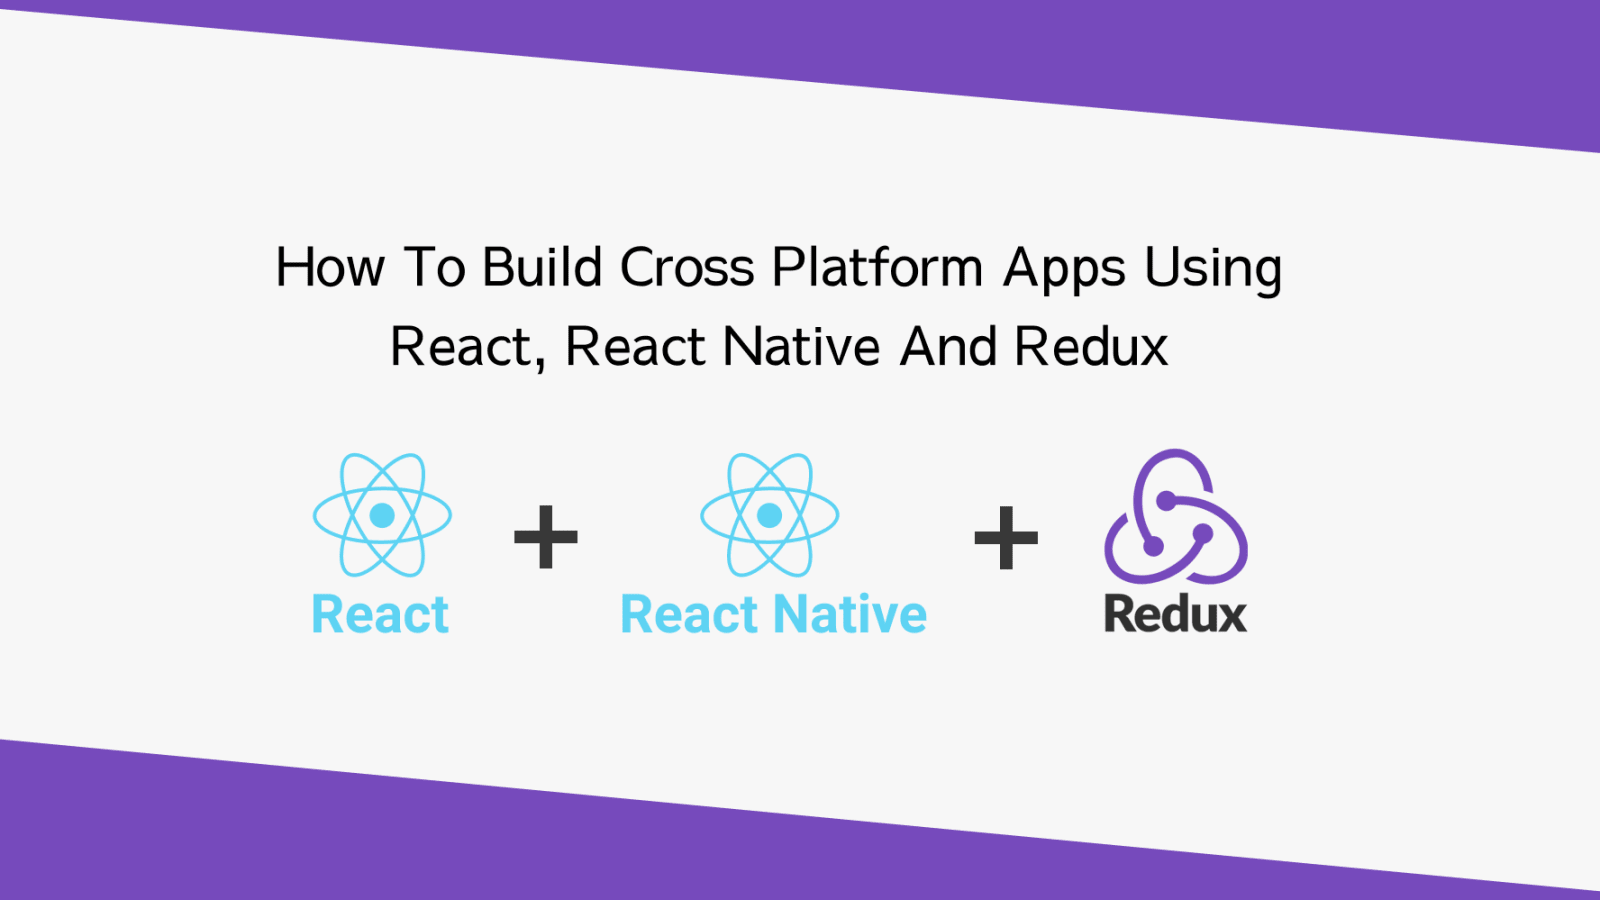 Building cross-platform apps with Expo instead of React Native